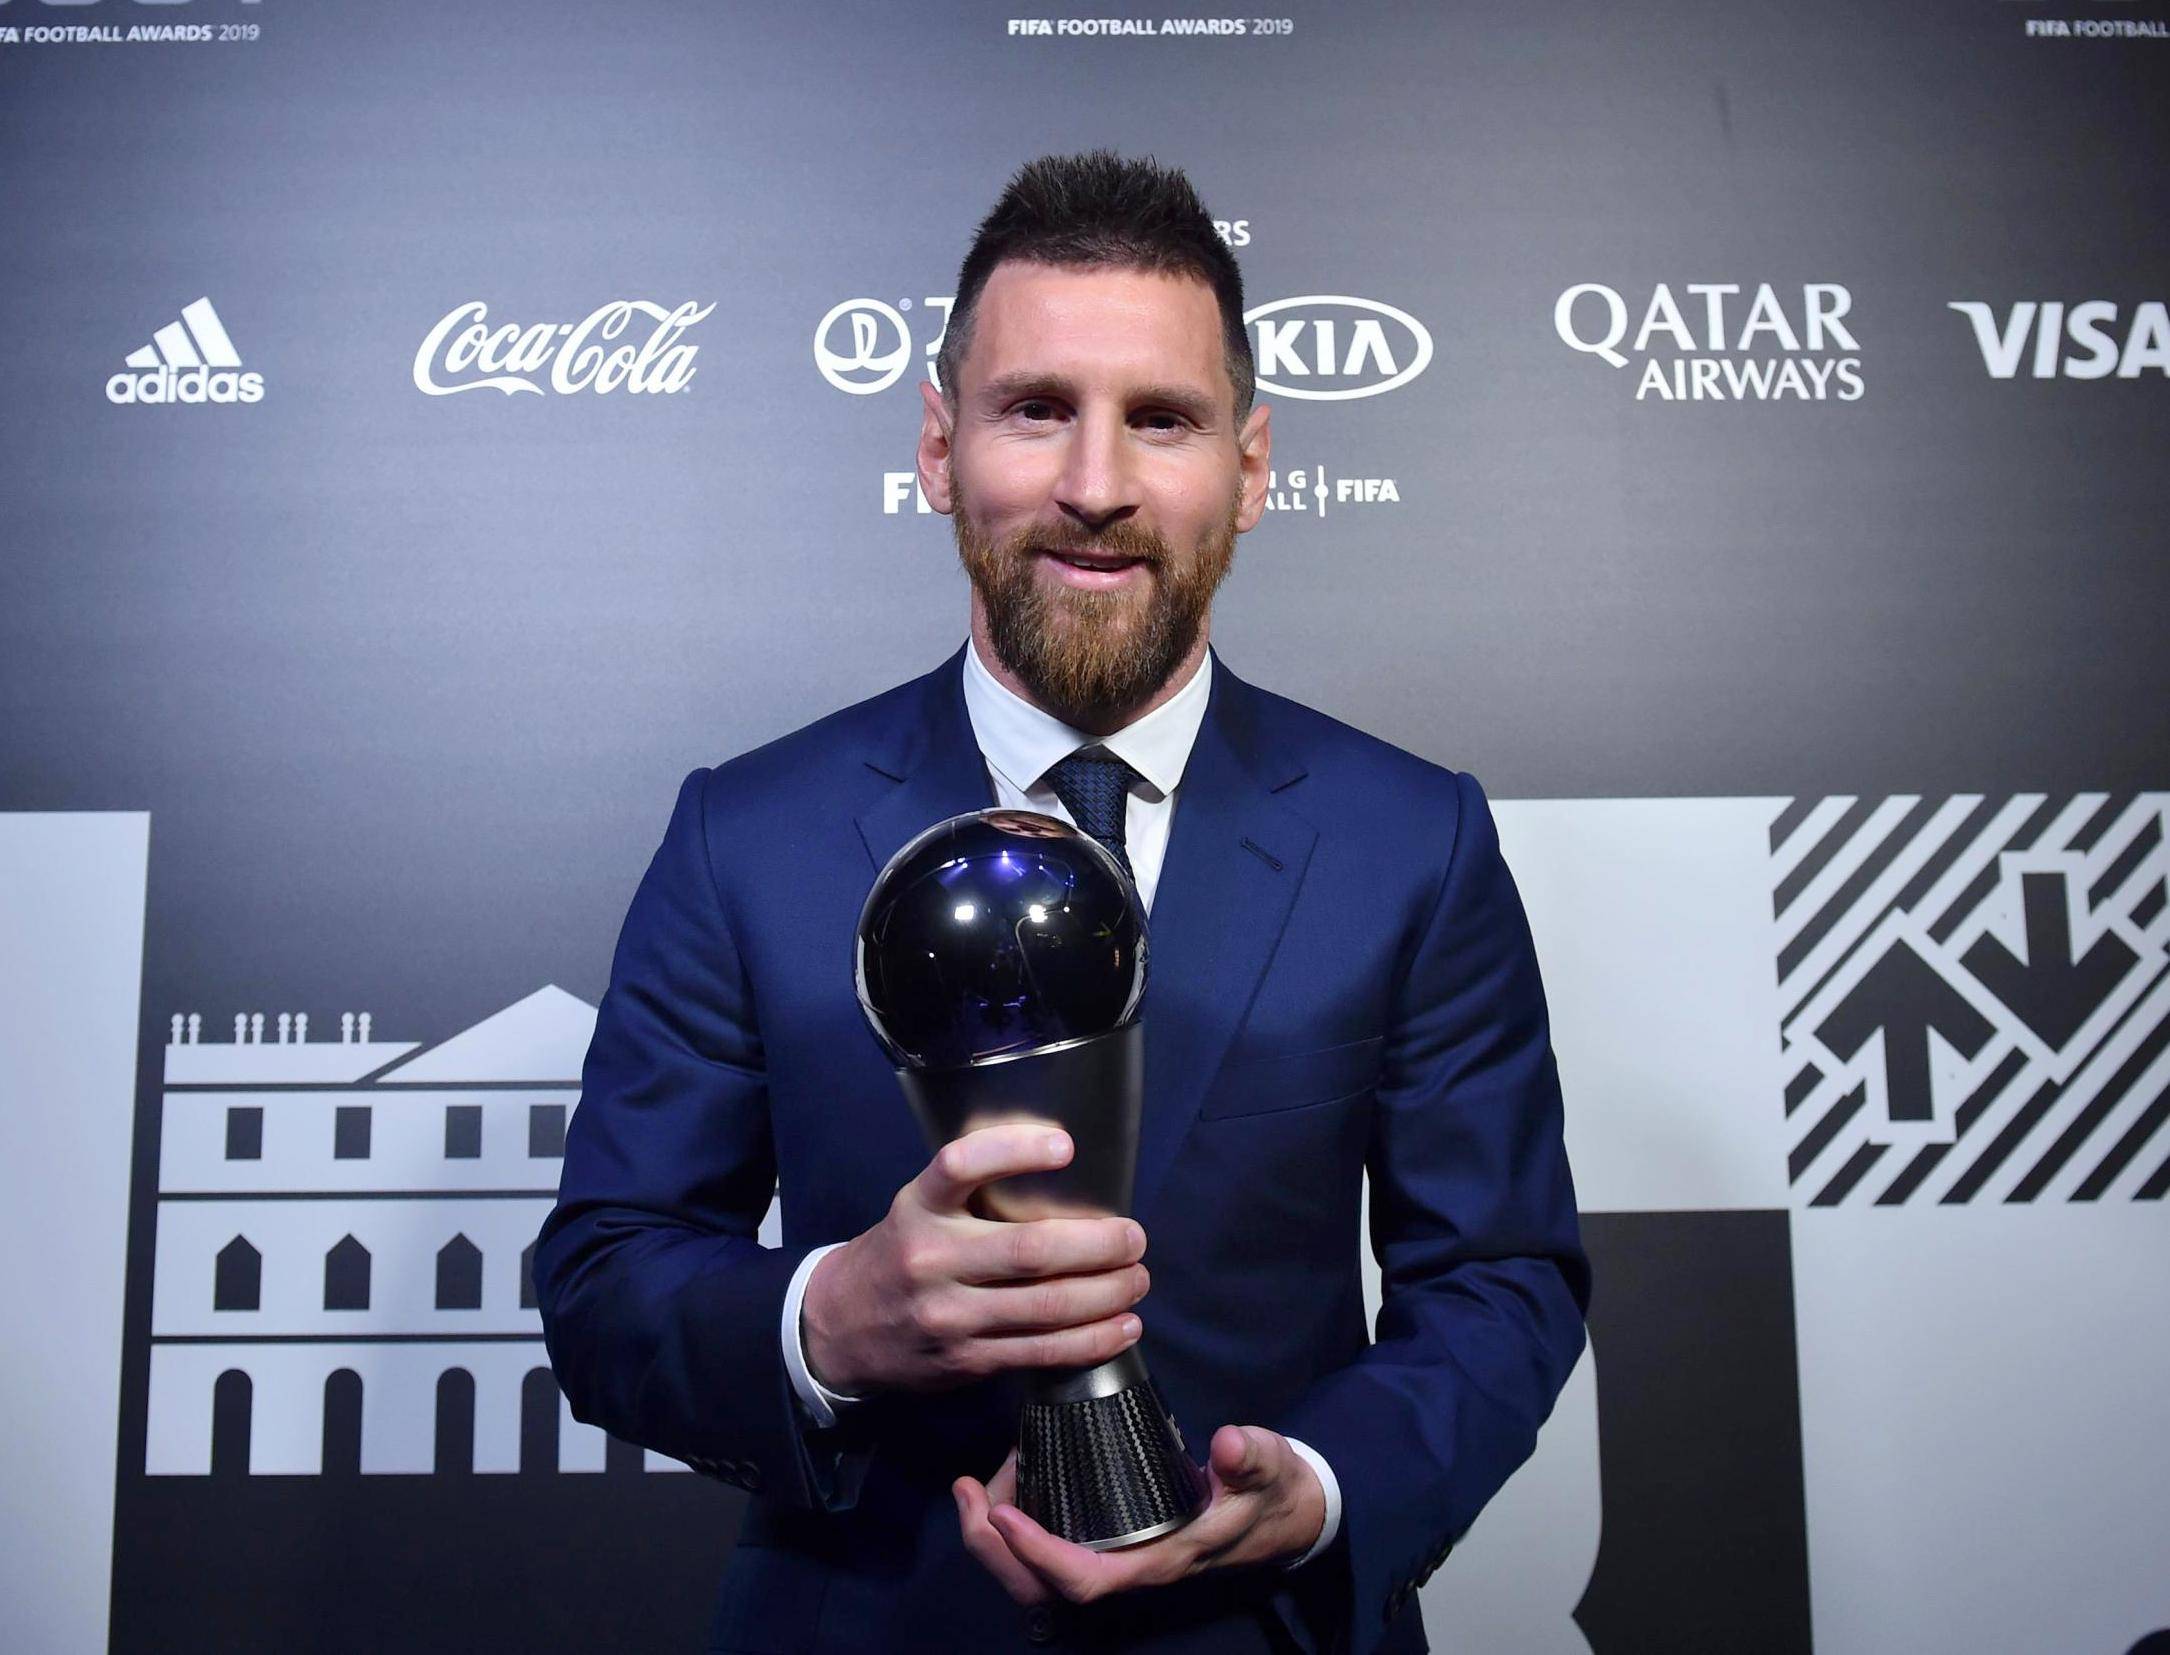 FIFA Awards "data-caption =" Lionel Messi wins the 2019 FIFA Best Male Player Award. "Data-source =" @ independent.co.uk